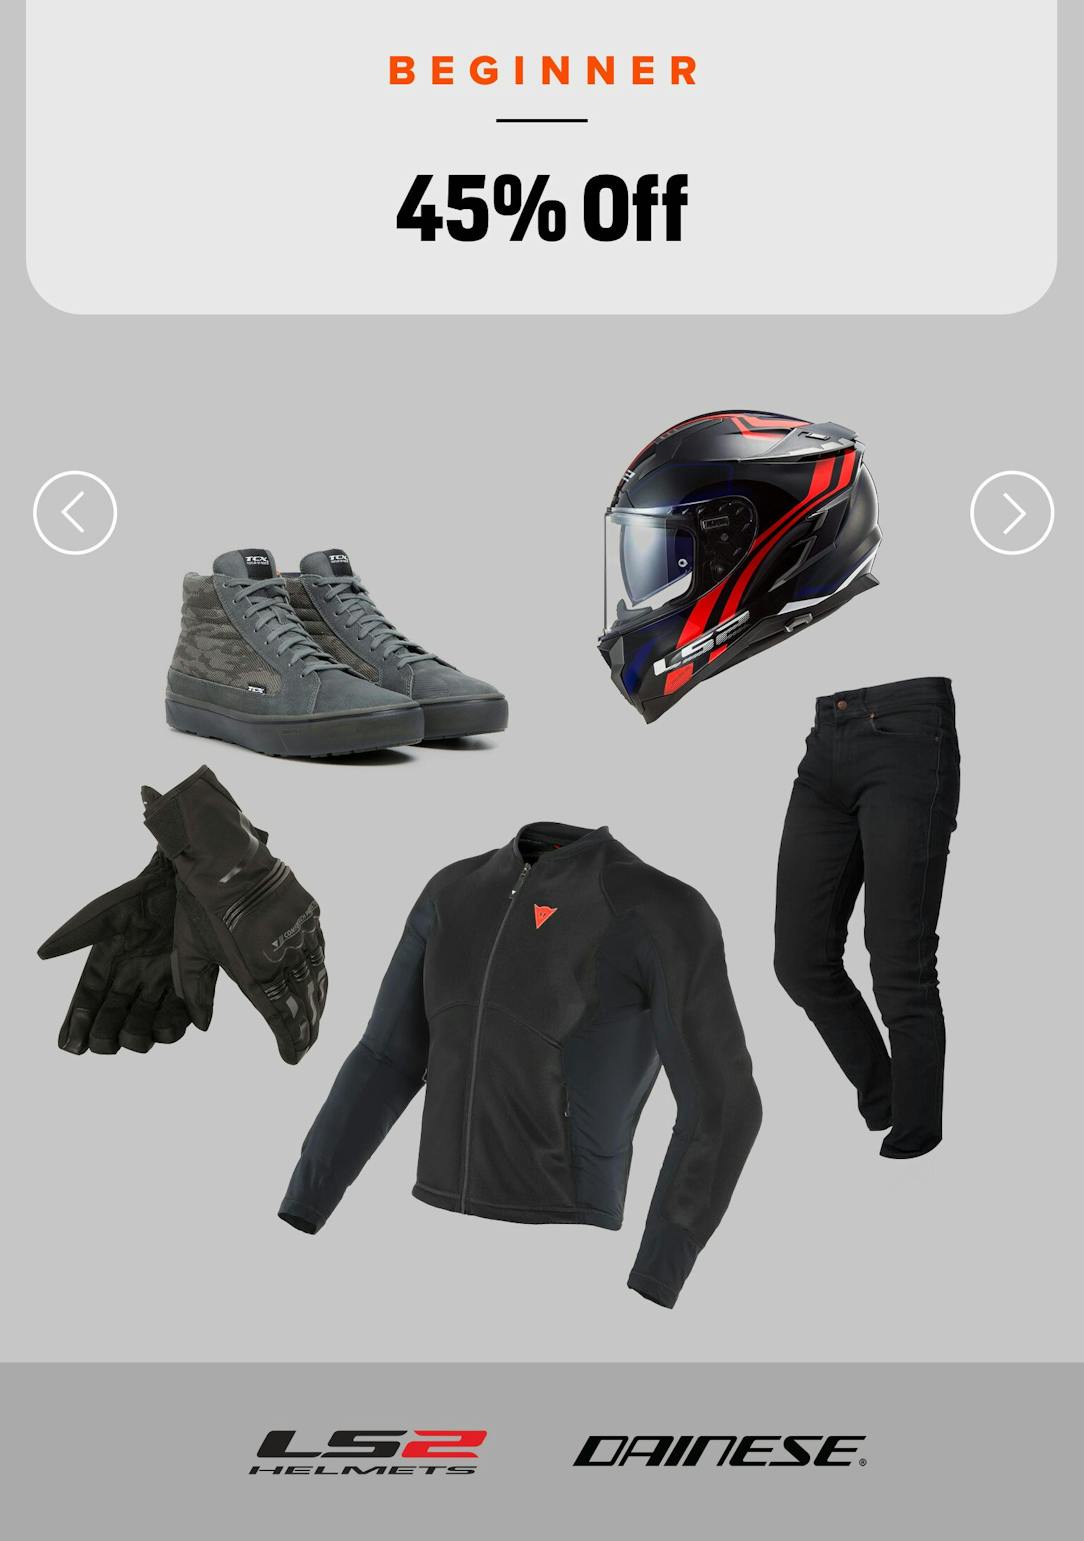 TOP CASES - Moto Market - Online Store for Rider and Motorcycle